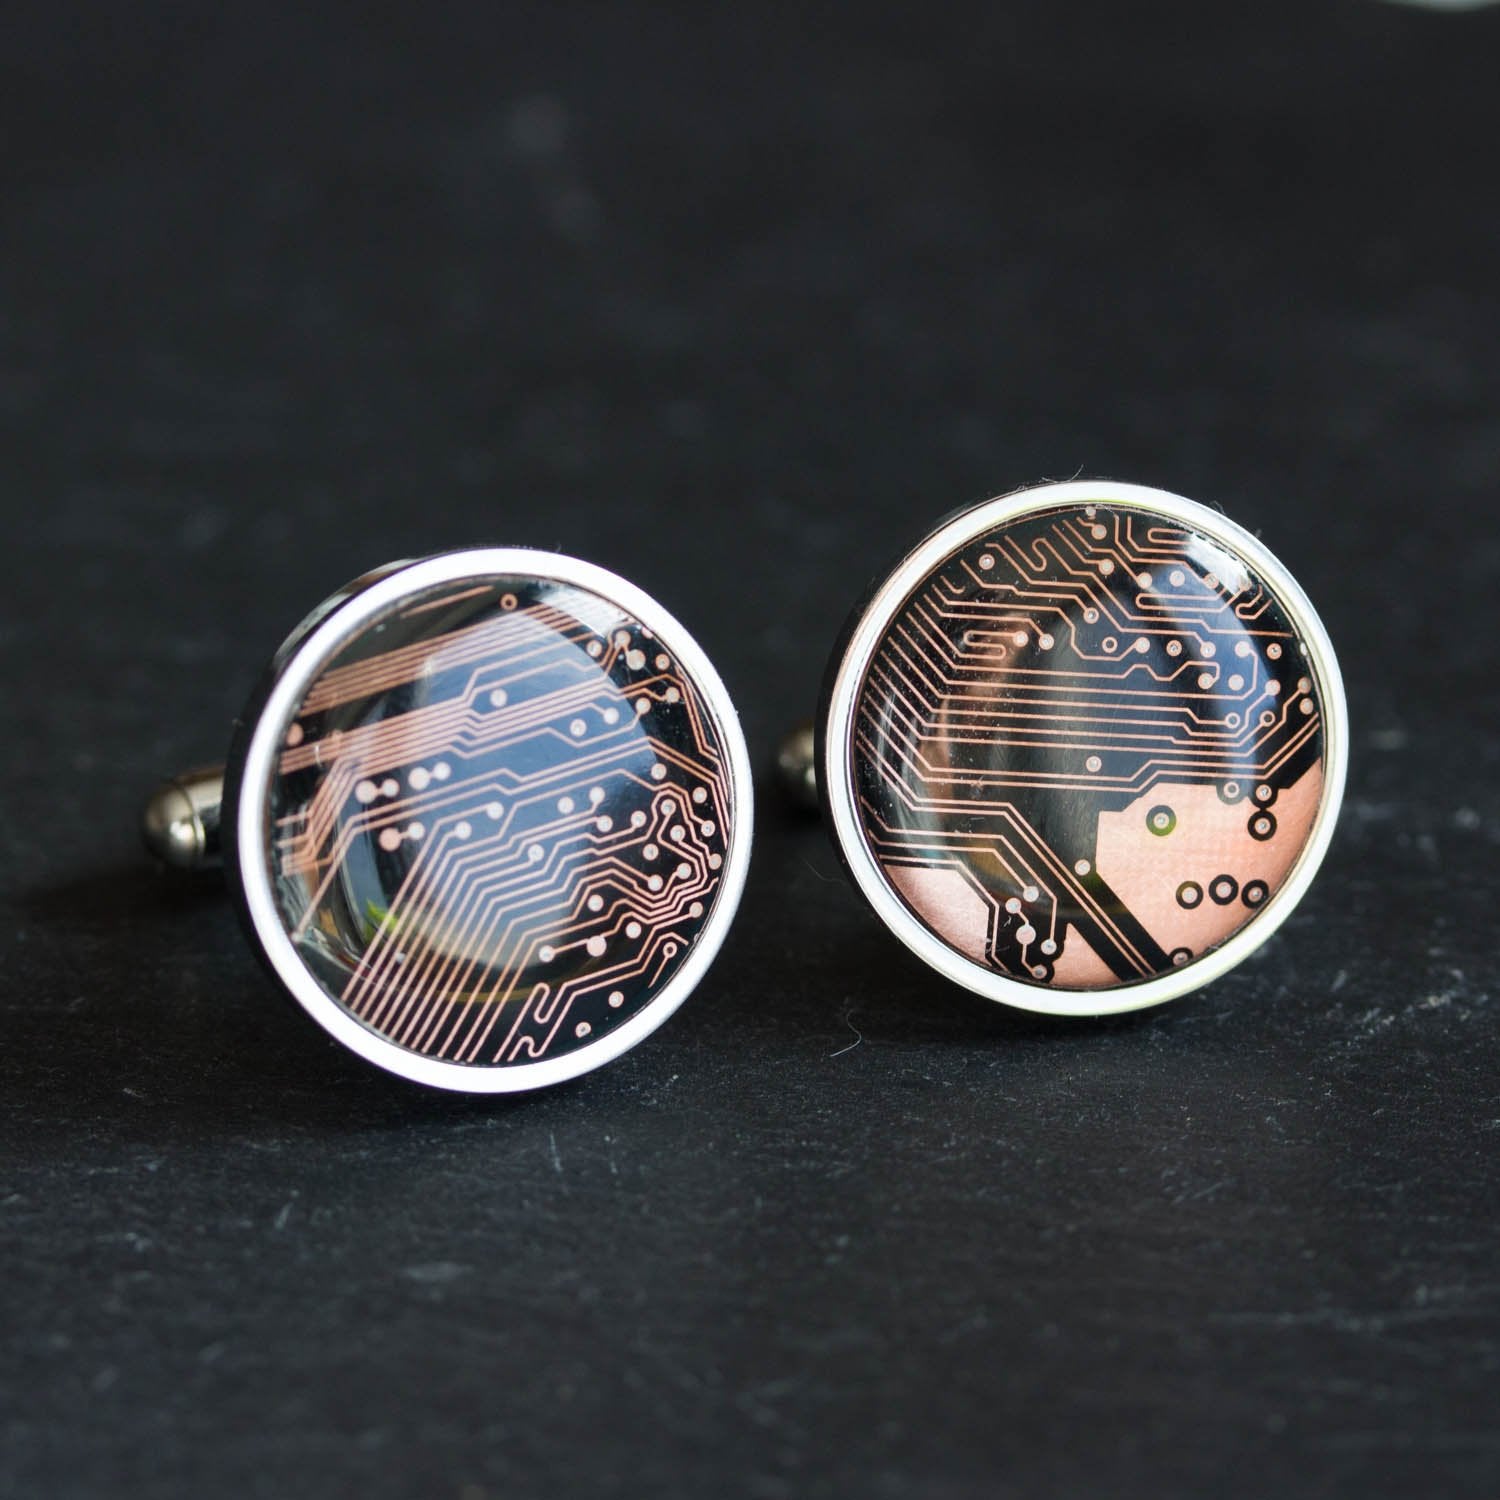 Black and Copper Cufflinks in stainless steel 